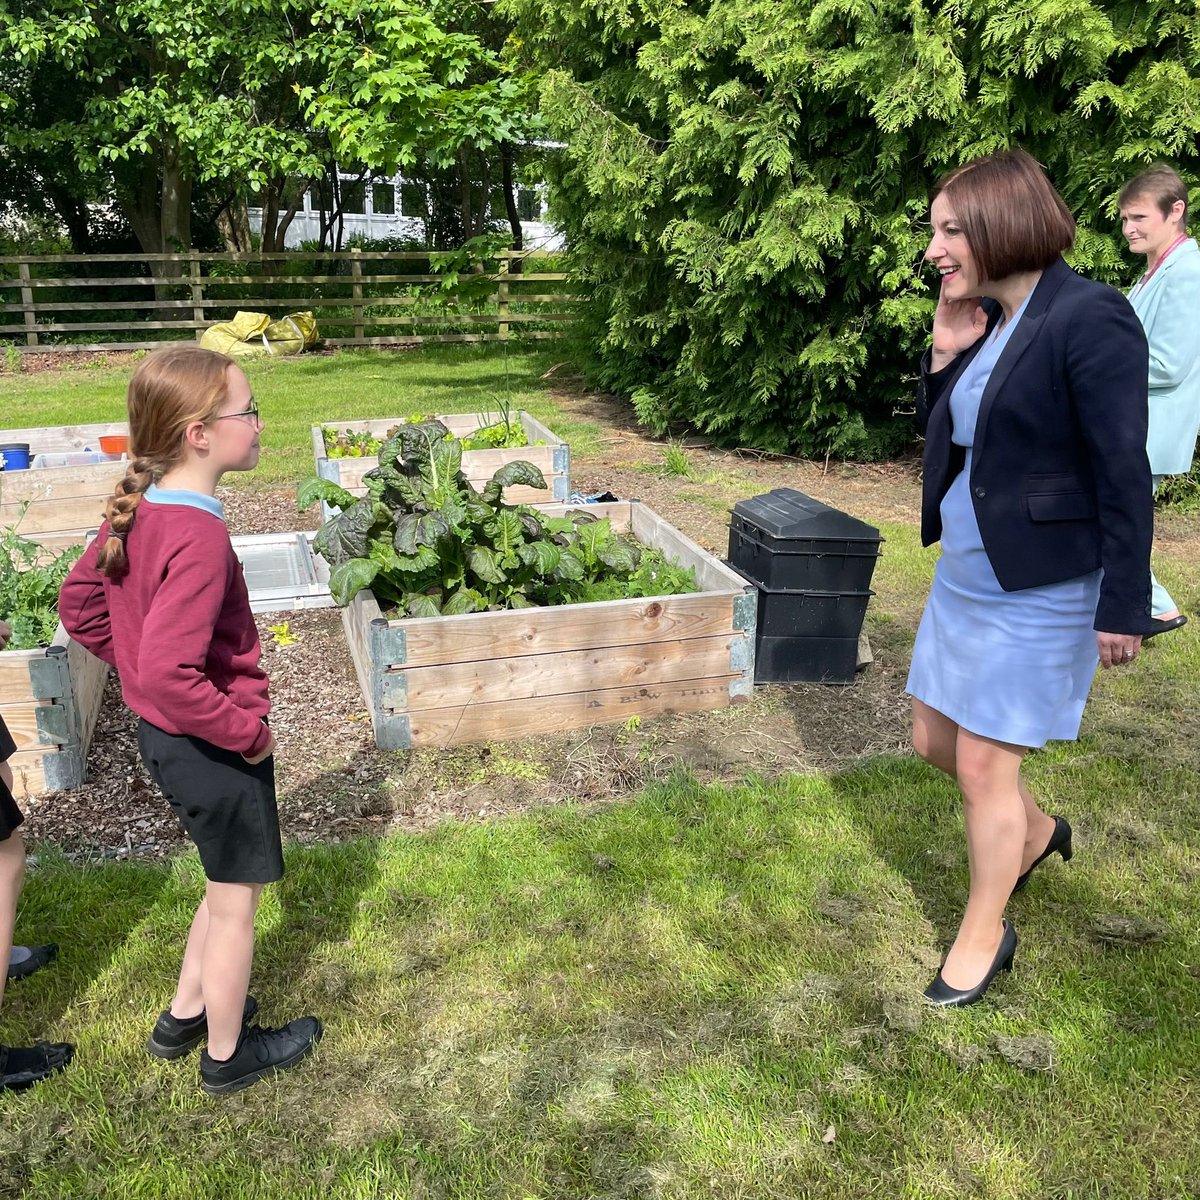 After years of stagnation under the Tories, Labour will deliver a broader, richer, future-facing curriculum. Our Review will ensure young people leave education ready for work, ready for life. Brilliant to see the work of @CorbridgeMiddle in action.